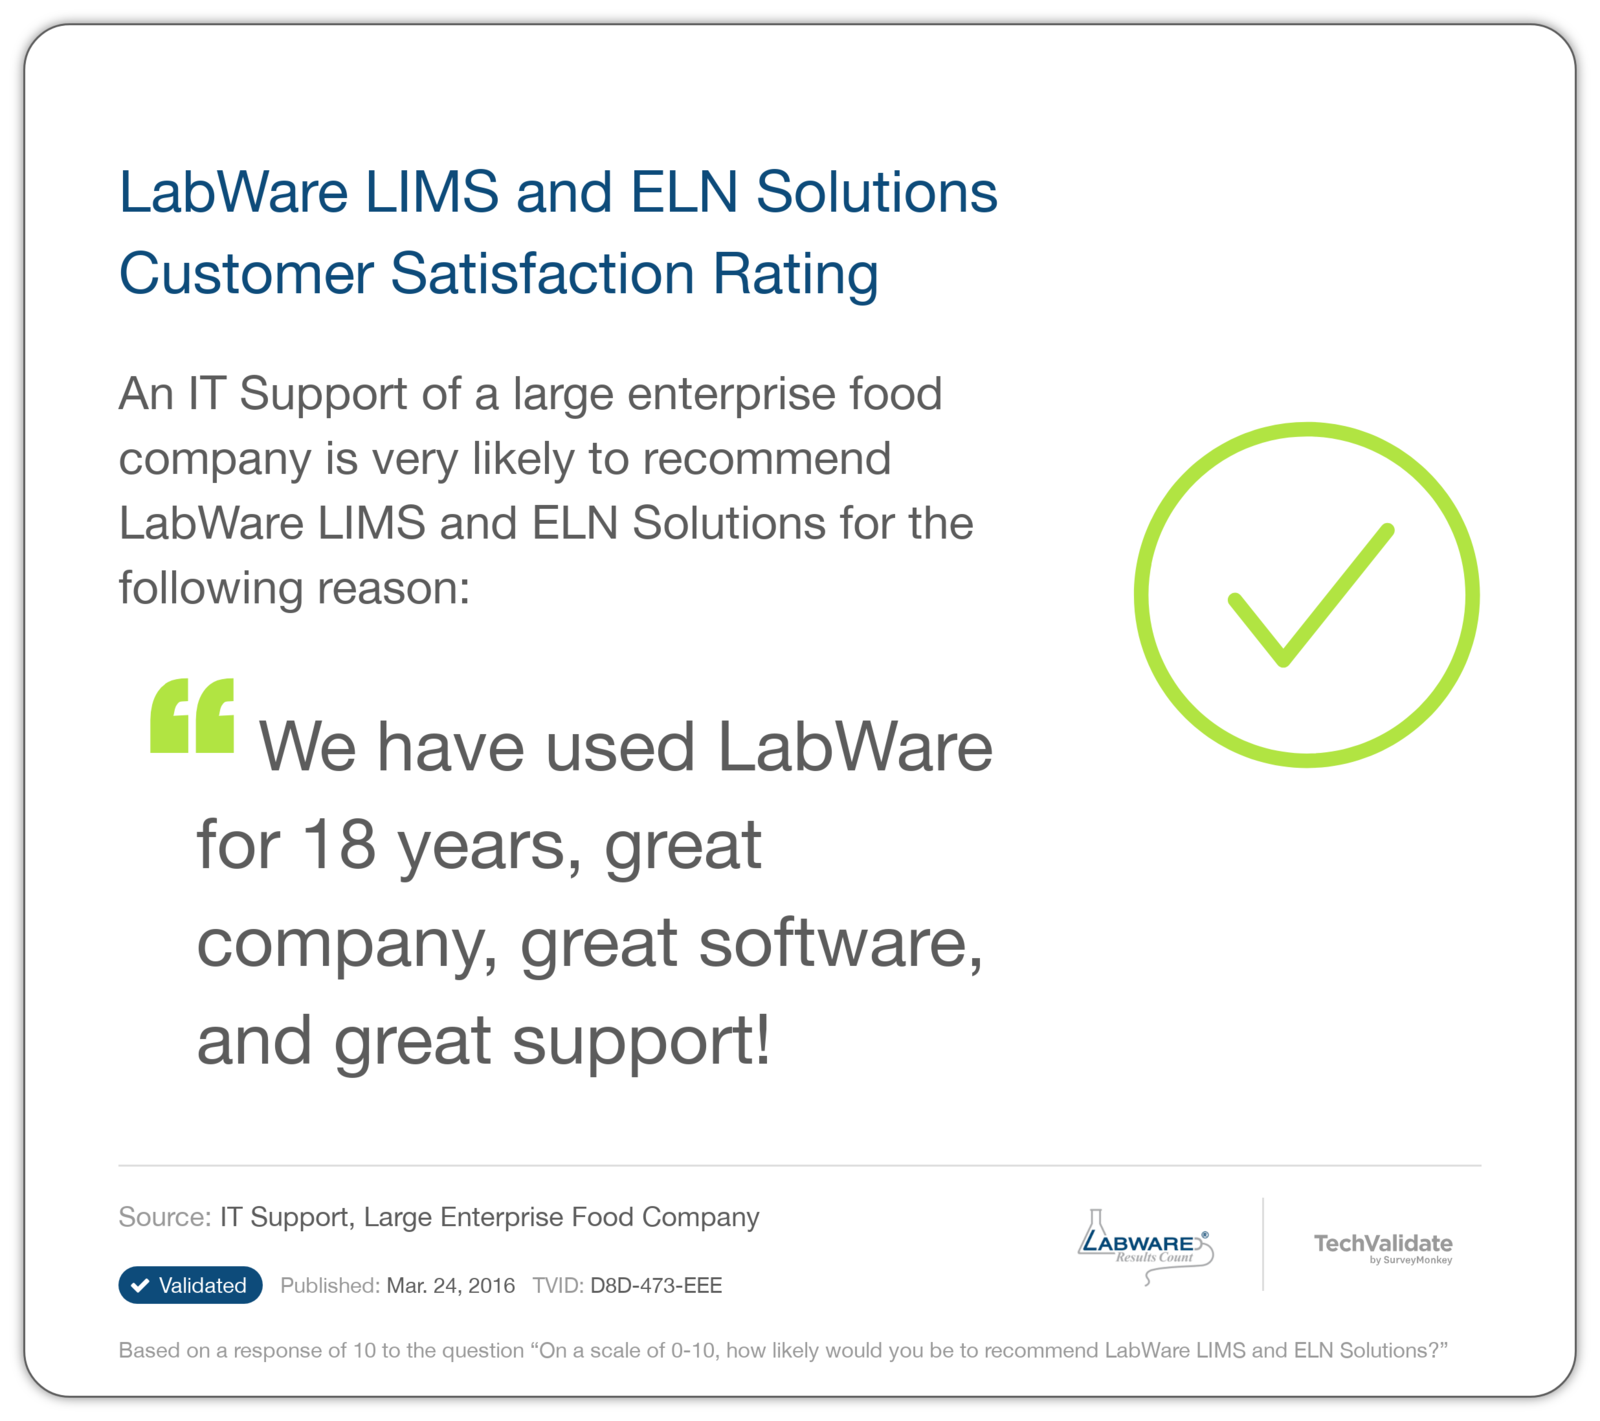 LabWare LIMS and ELN Solutions Customer Satisfaction Rating